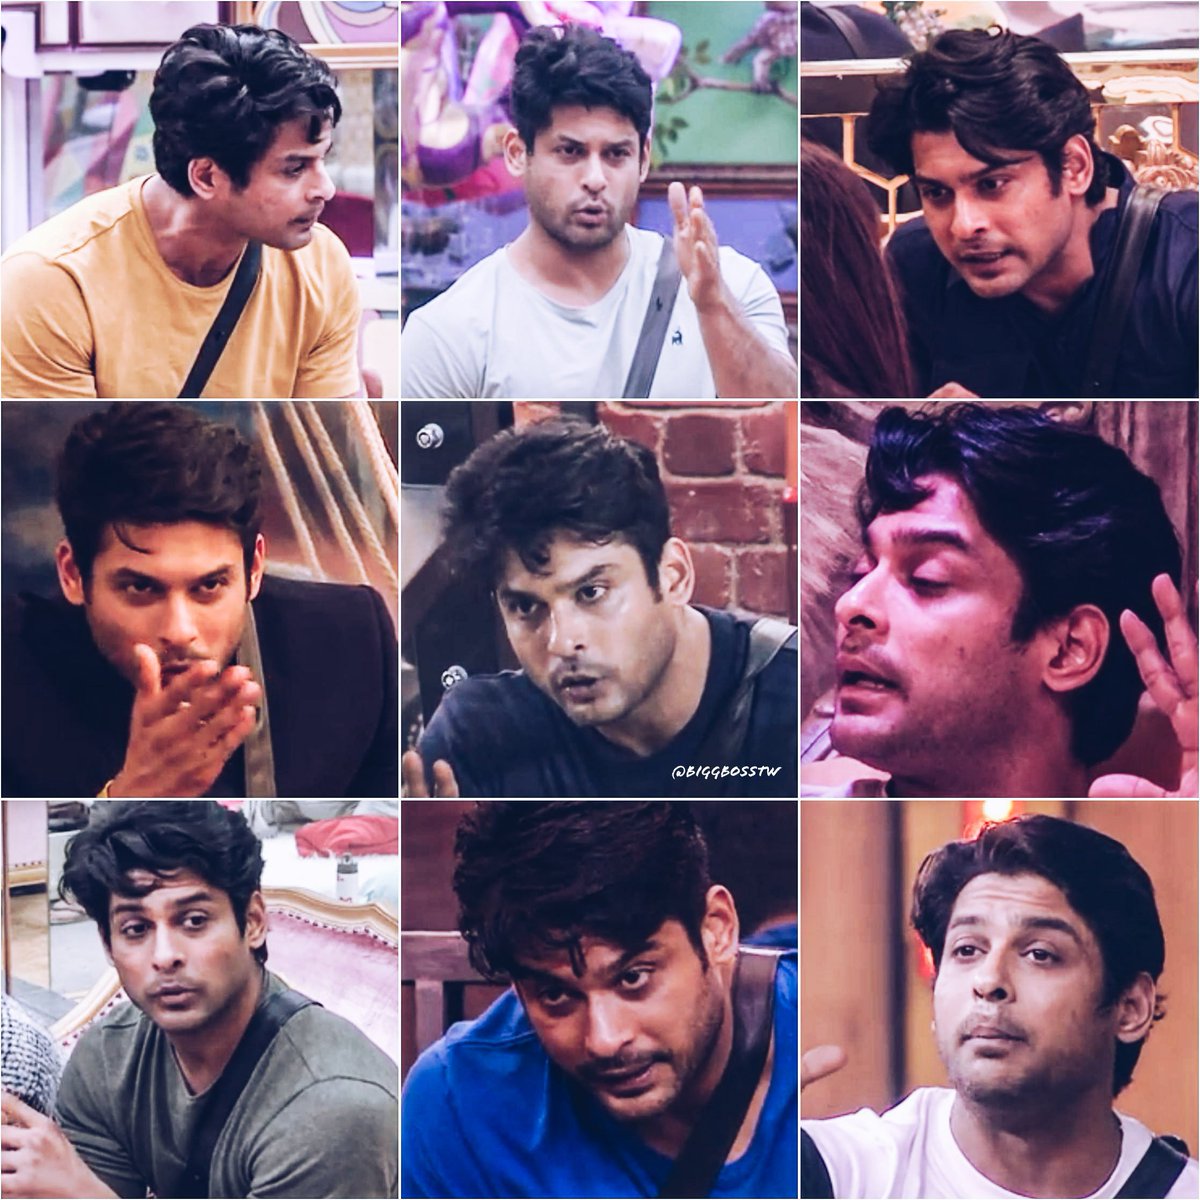 When he tries to explain things to people & they don't understand, esp if they are close like Sana or Asim, his nerves peep out.  @sidharth_shukla, you are too hot to handle. Period. #SidharthShukla